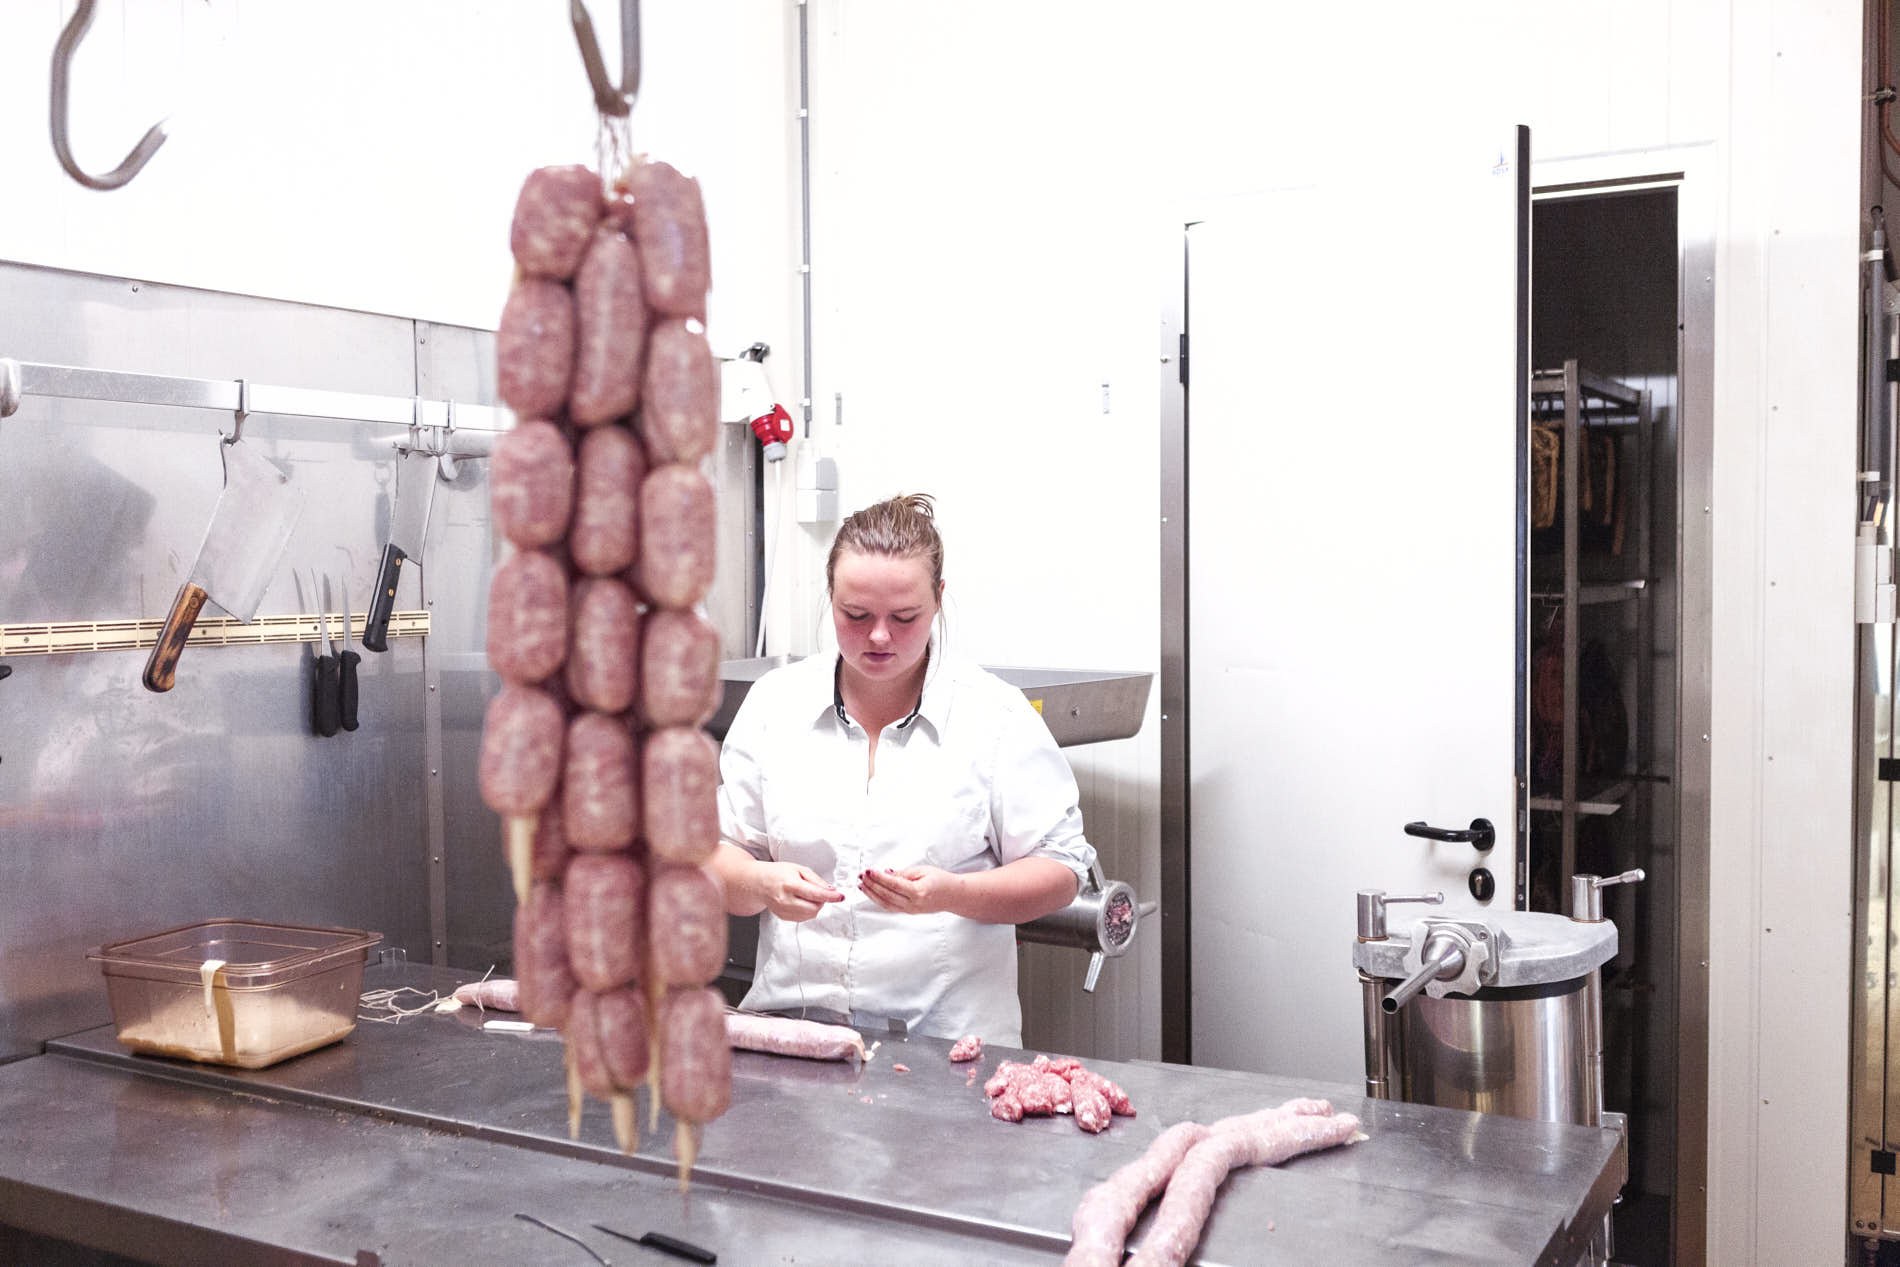 female butcher in a butchery witch fresh sausages hanging from a hook